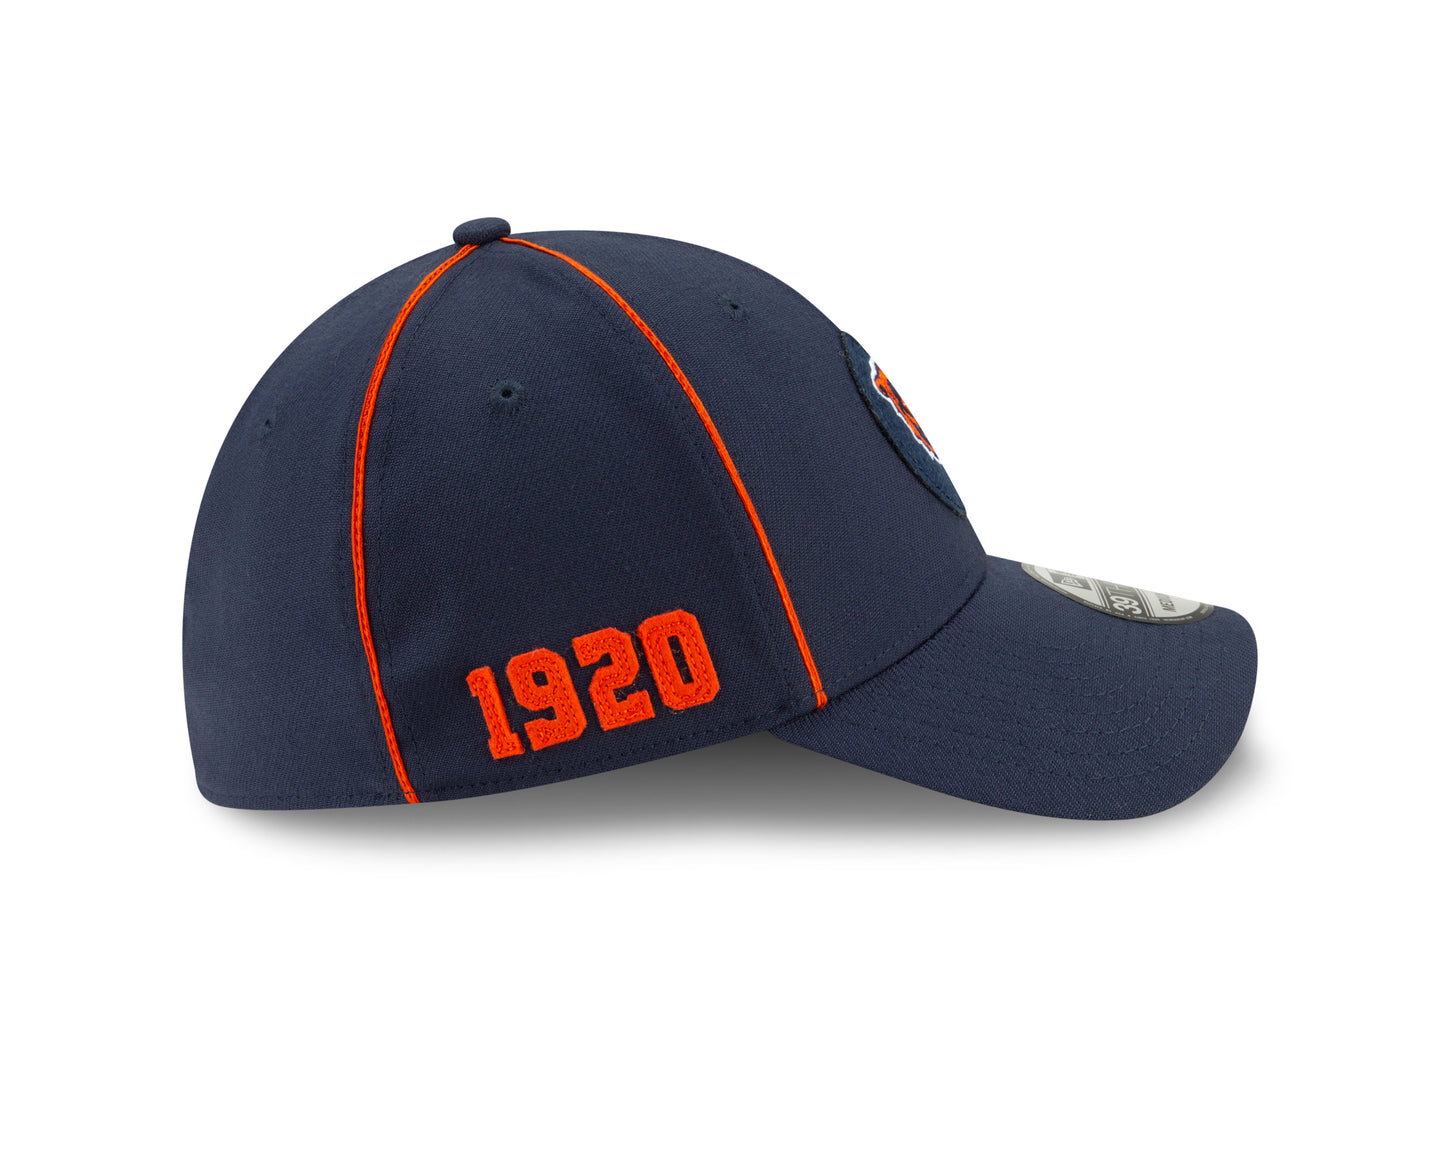 Chicago Bears 2019 Established Collection Sideline 1920 Home Bear Head Logo Navy 39THIRTY Flex Hat